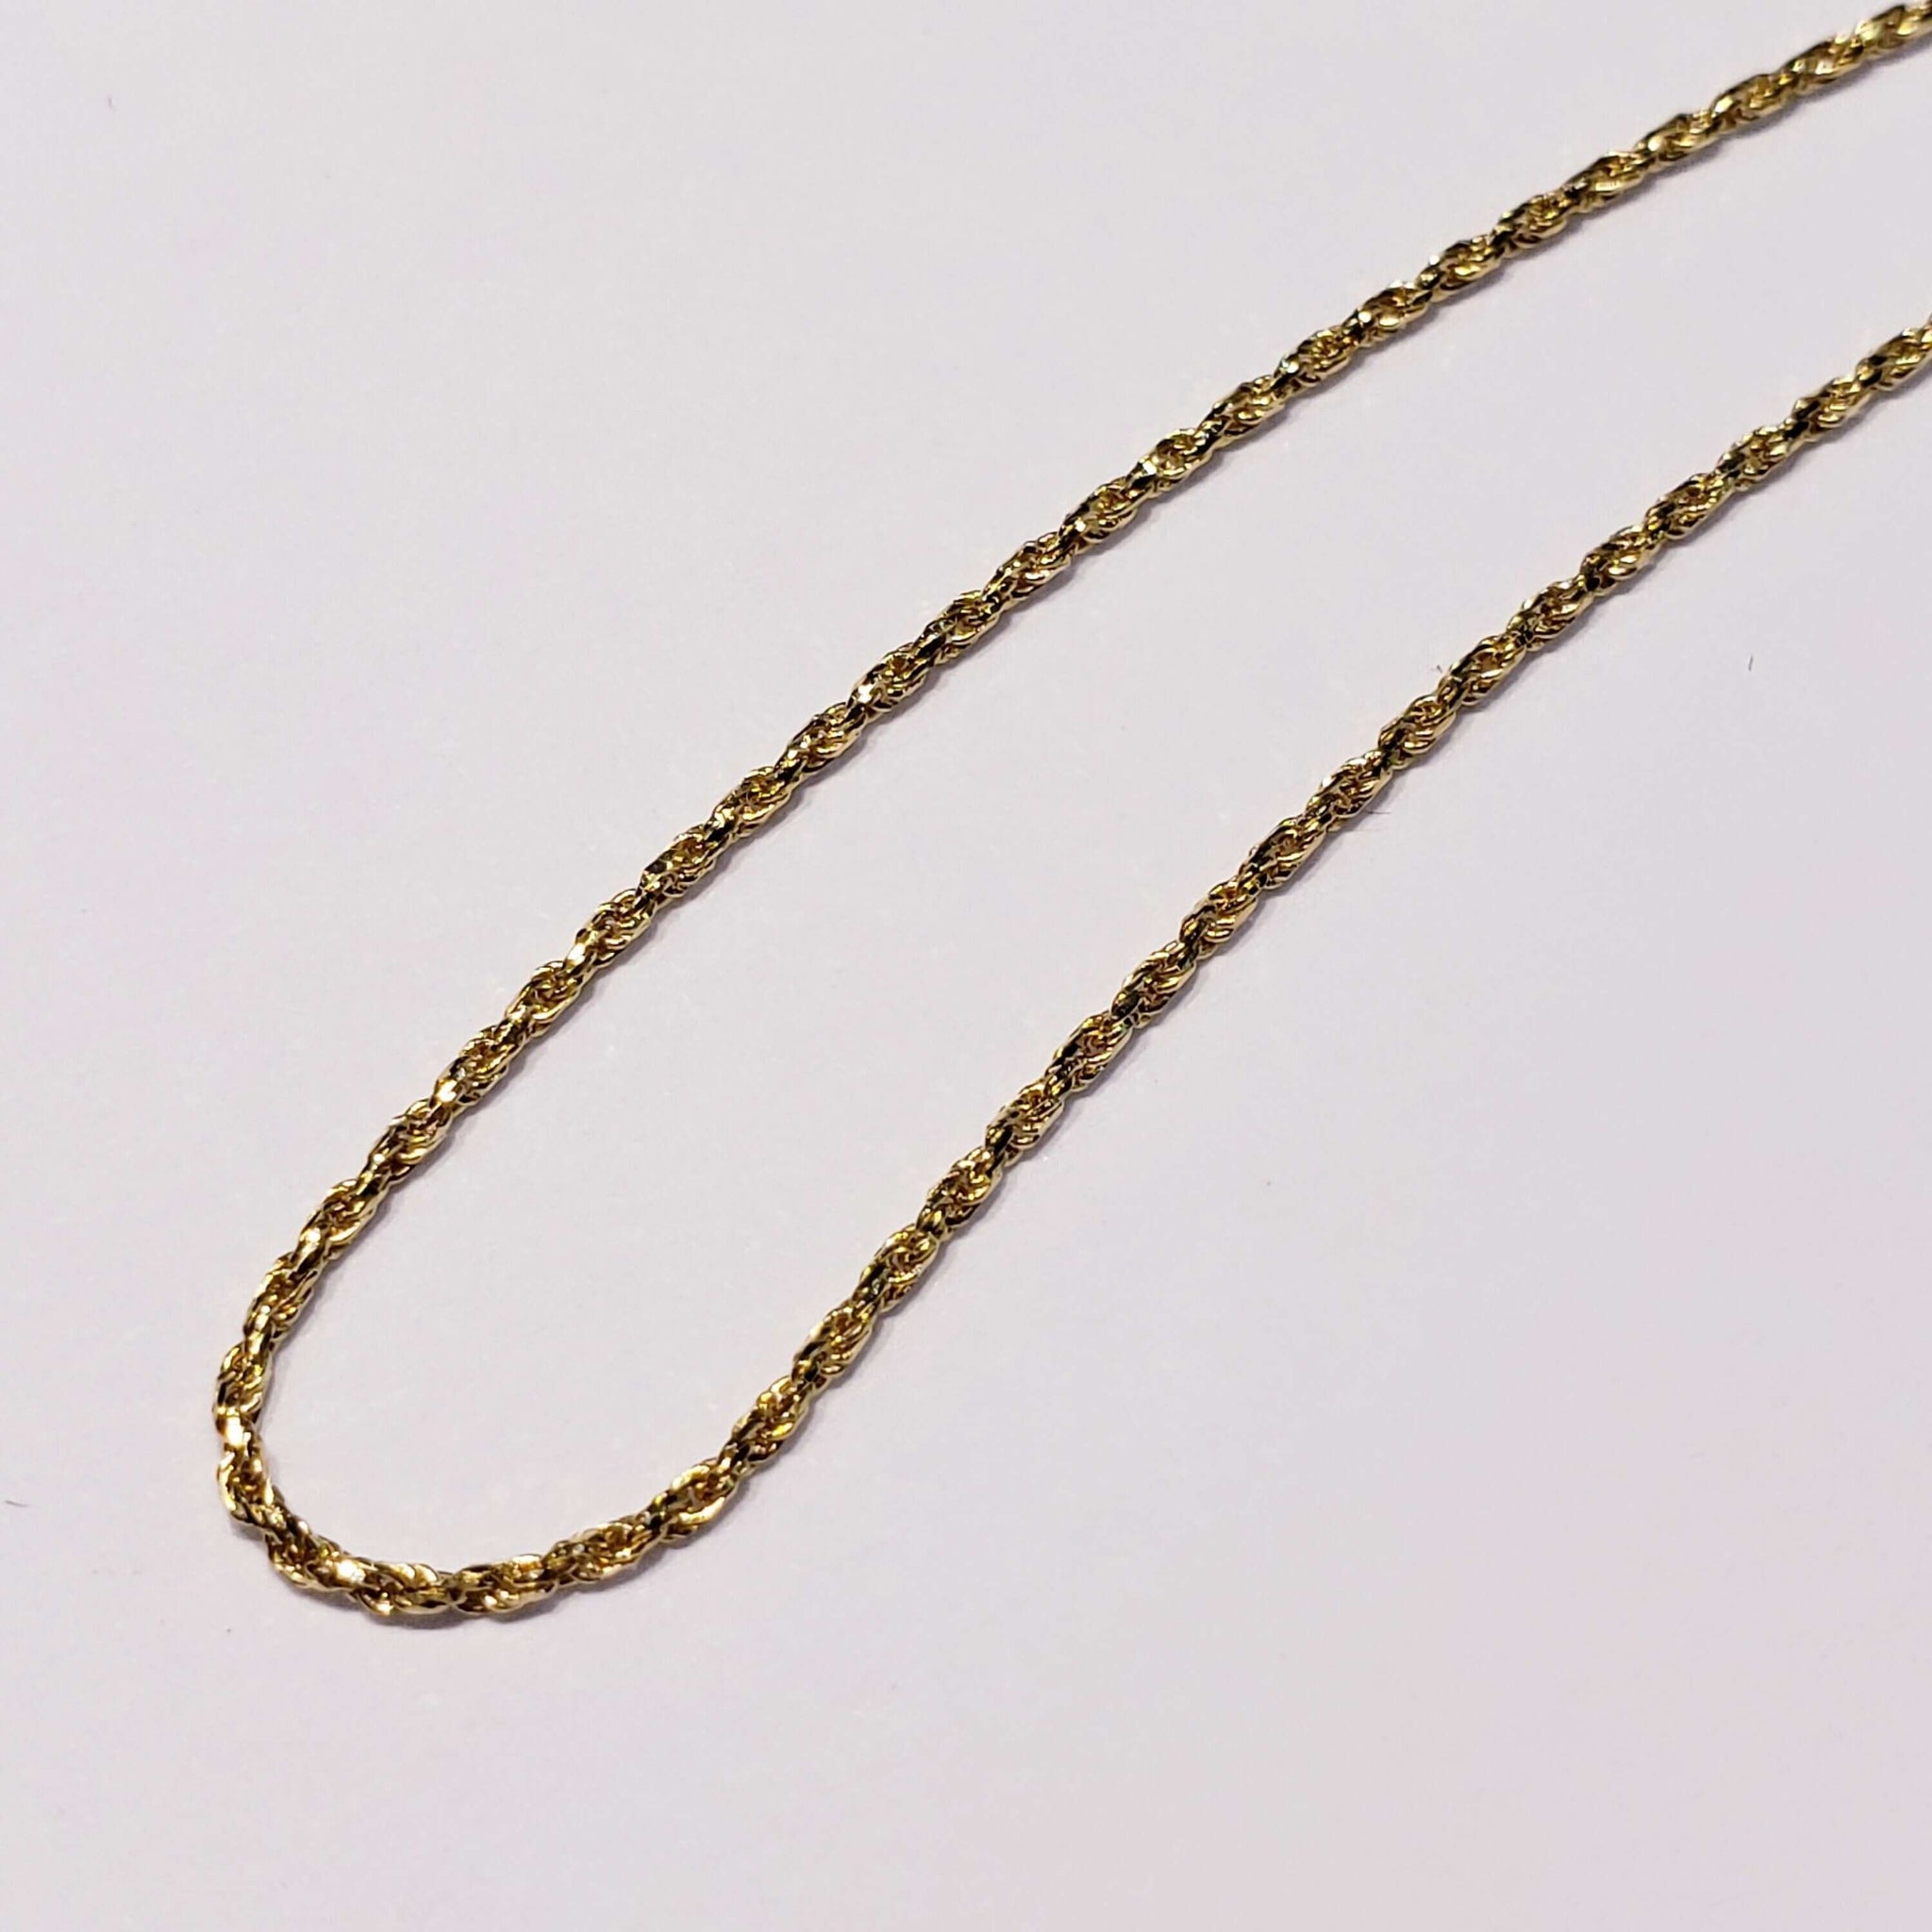 Adjustable 14K Yellow Gold Rope Chain 16-22" PN: AROY1-22